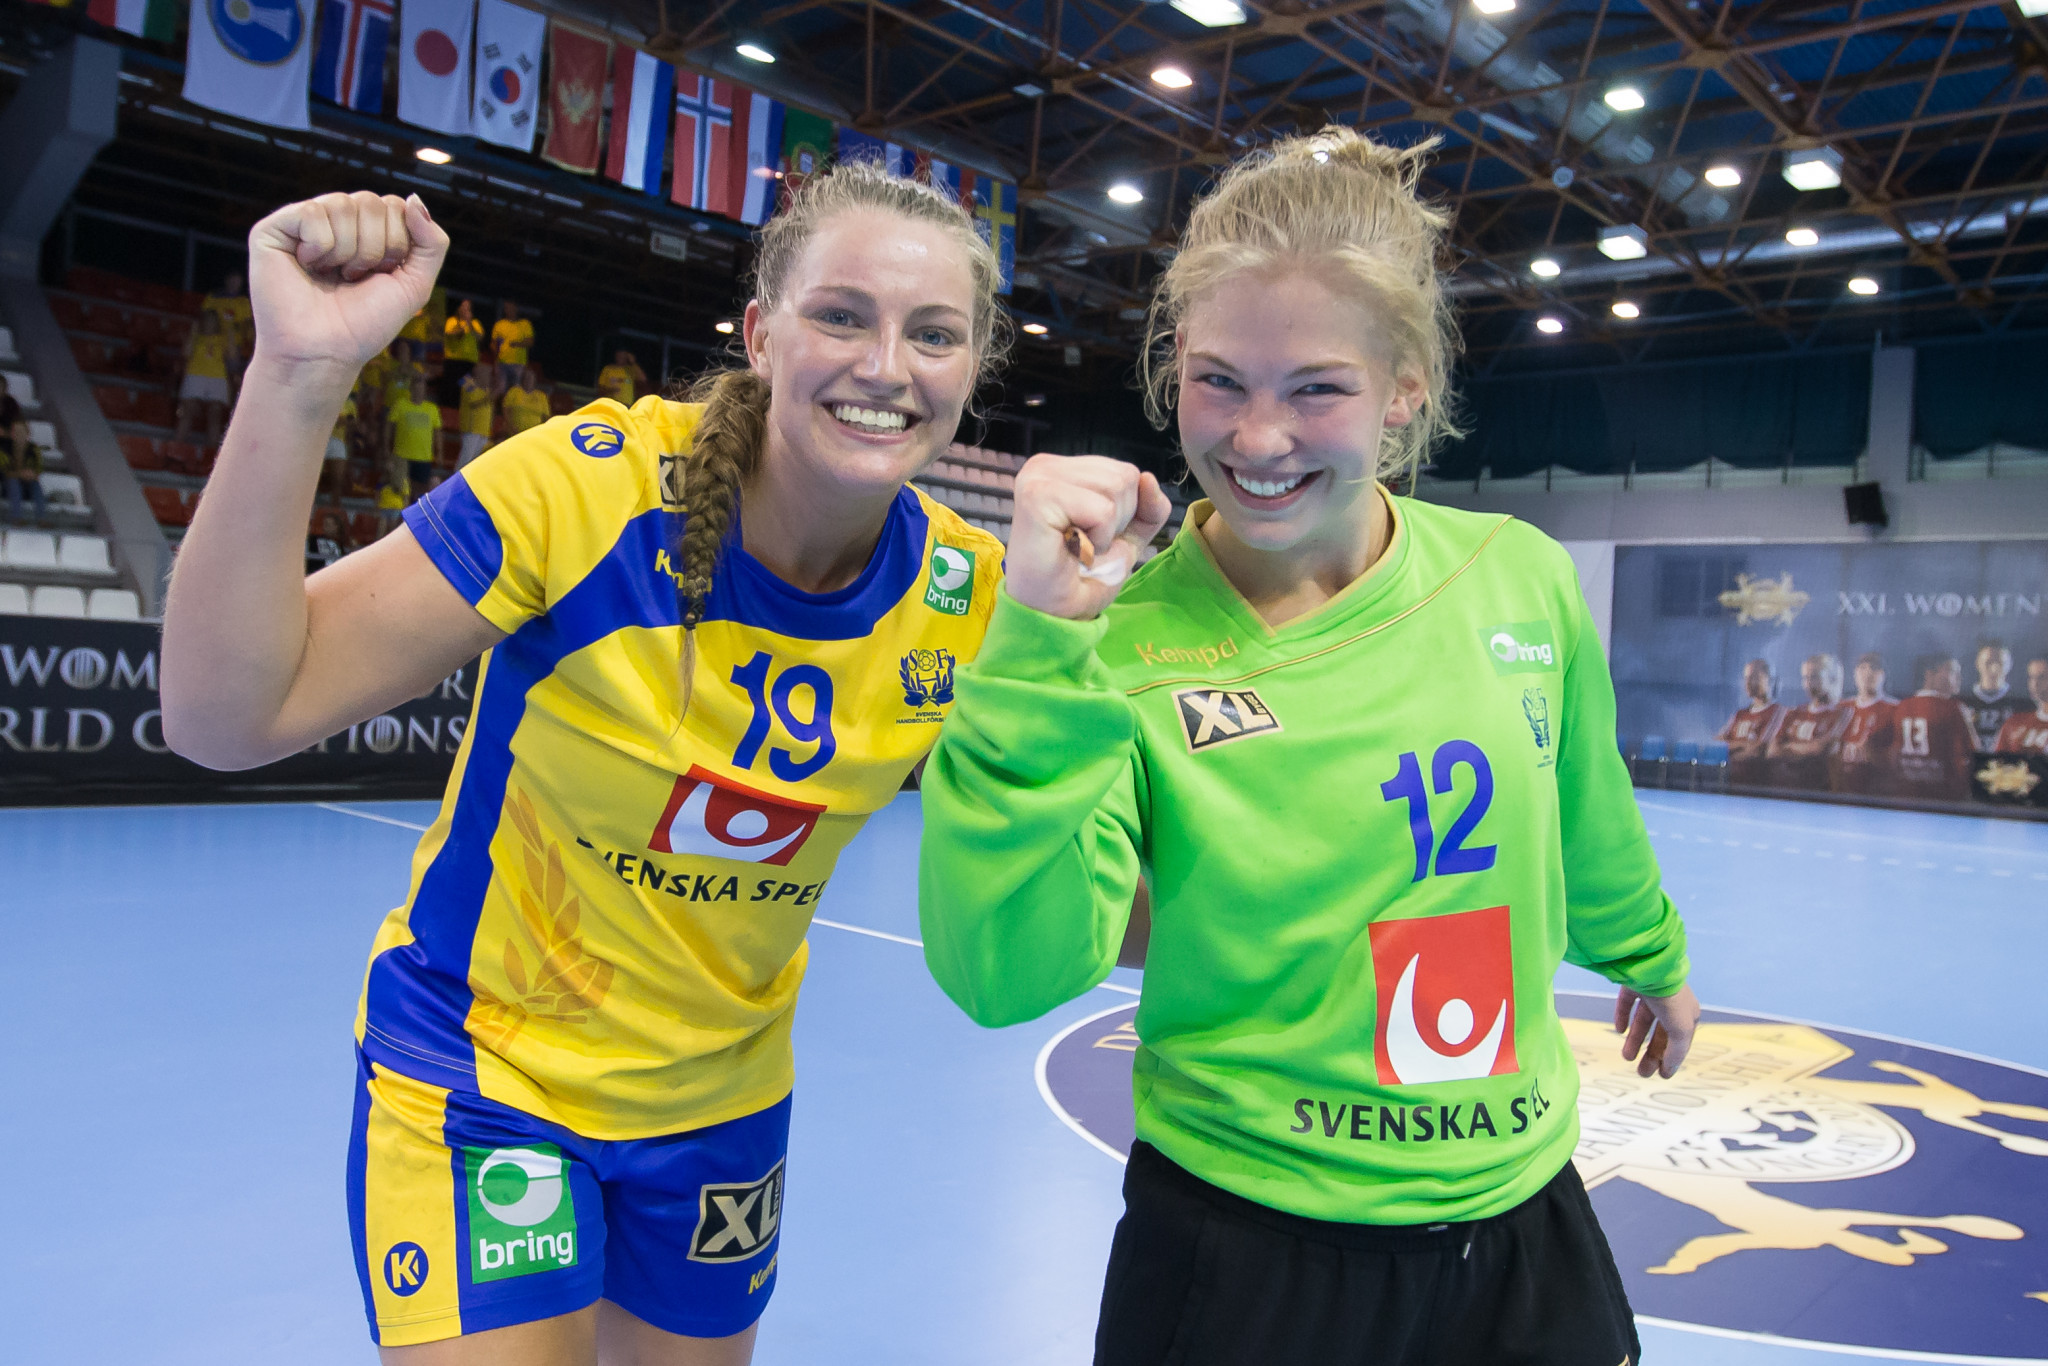 Sweden were among the countries to claim their second wins today ©Debrecen 2018